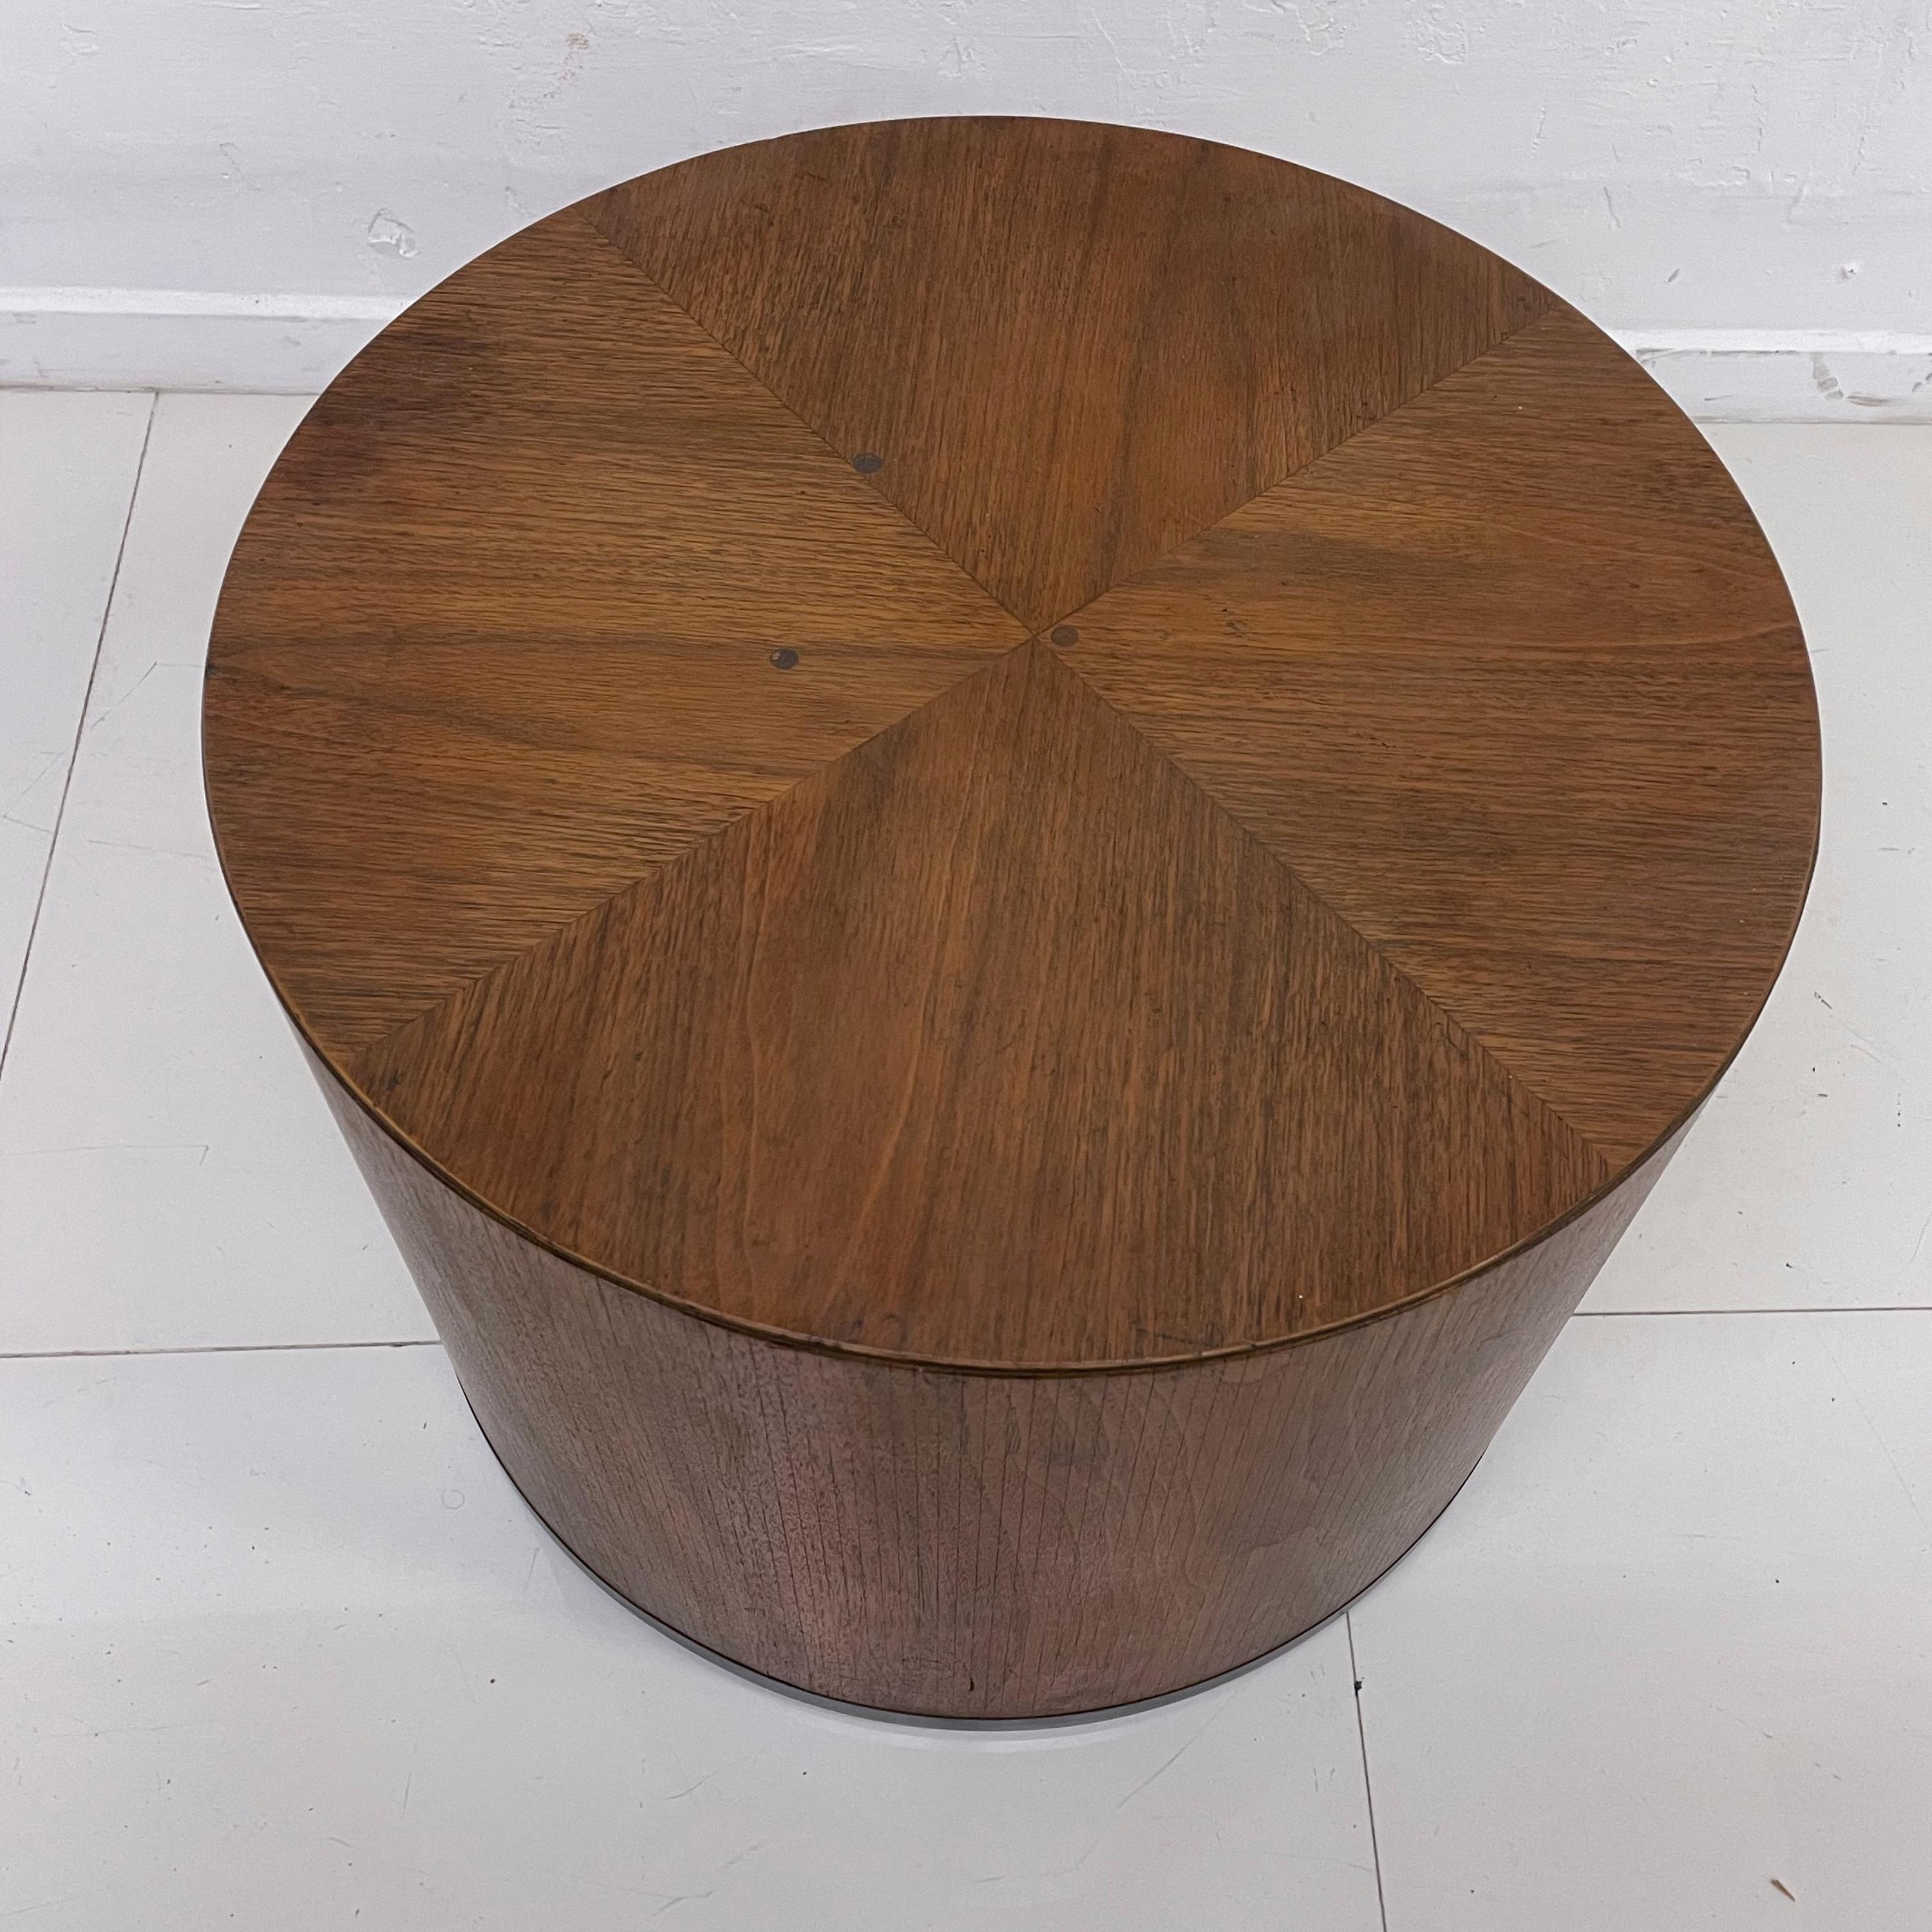 Minimalist modern lane round drum side table in walnut wood midcentury, 1960s, USA
Stamped by Maker LANE Altavista Virginia
Dimensions: 20 in diameter x 15.25 tall
Original unrestored midcentury vintage condition please see images.
Delivery to